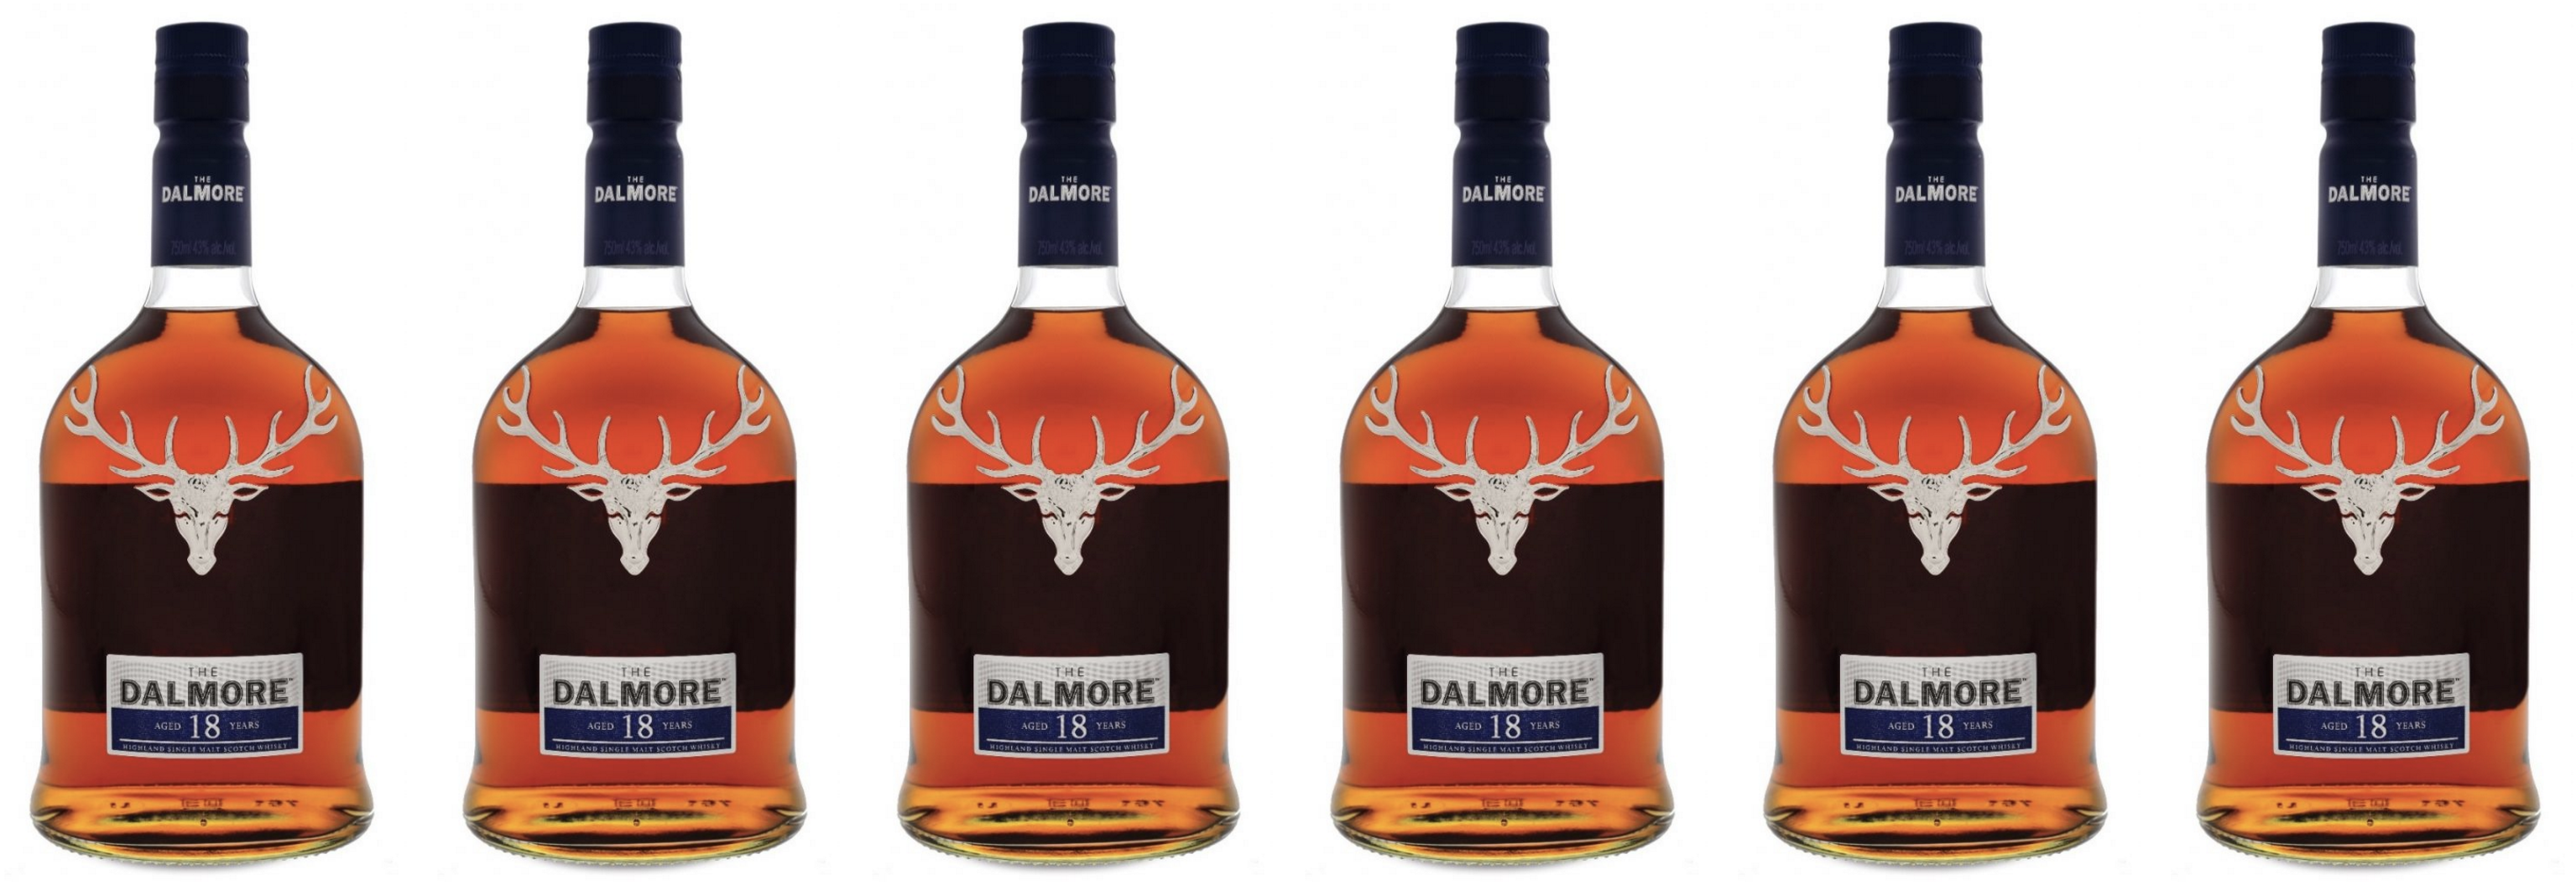 Try This : The Dalmore 18 Year Old Malt Whisky